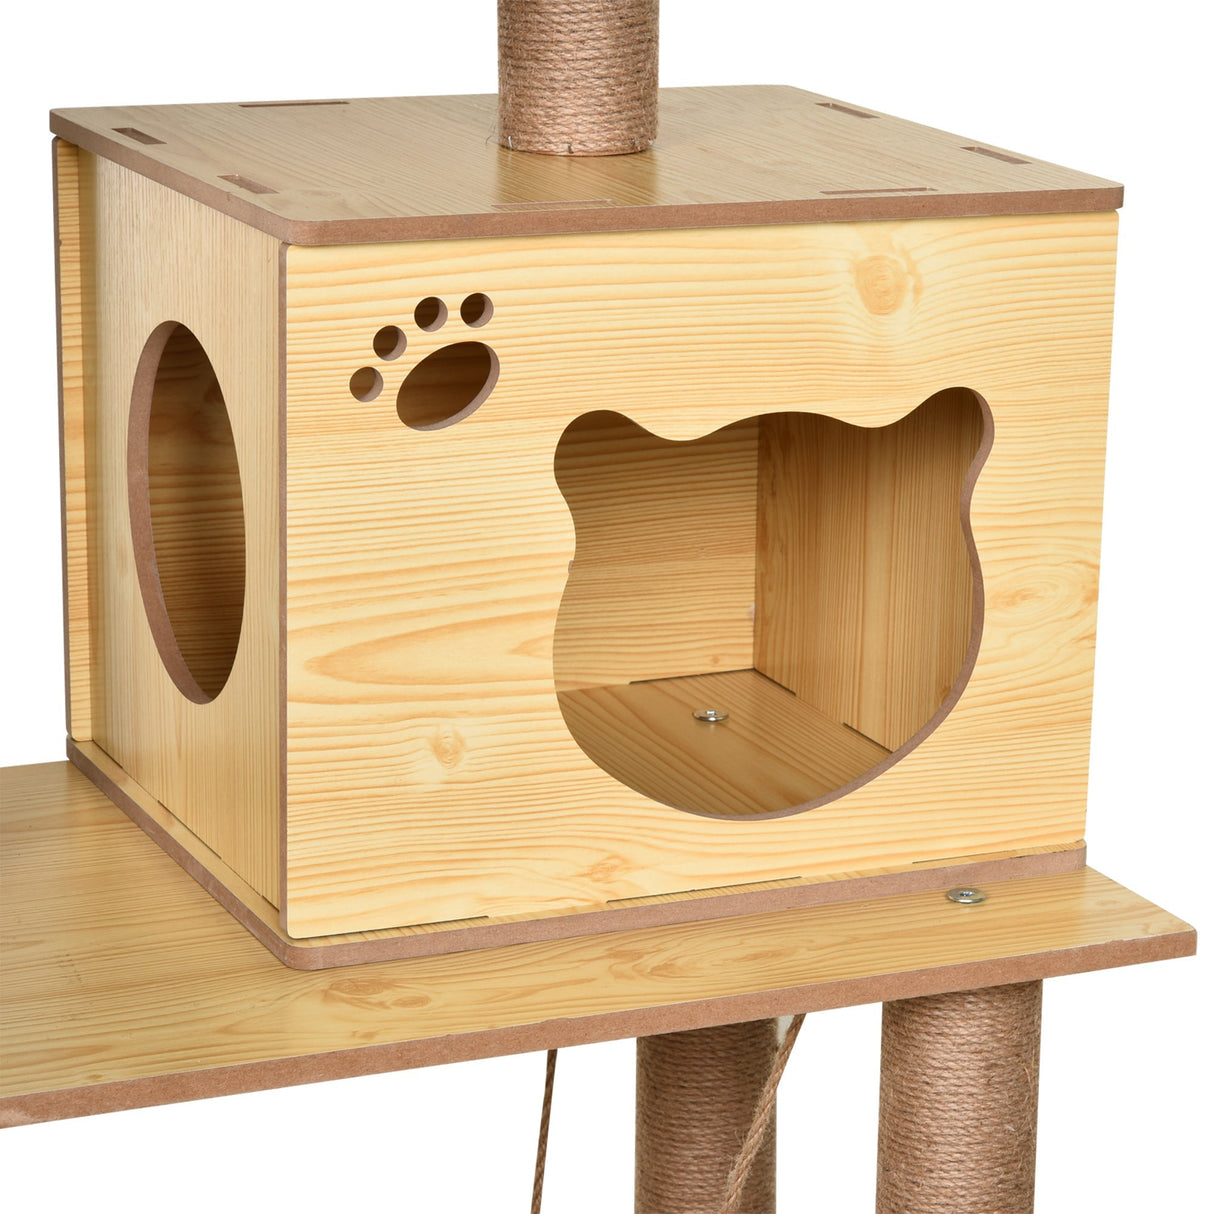 130cm Cat Tree for Indoor Cats, Multi-Level Plush Cat Tower, with Five Scratching Posts, Two Perches, Cat House, Hammock, PawHut,